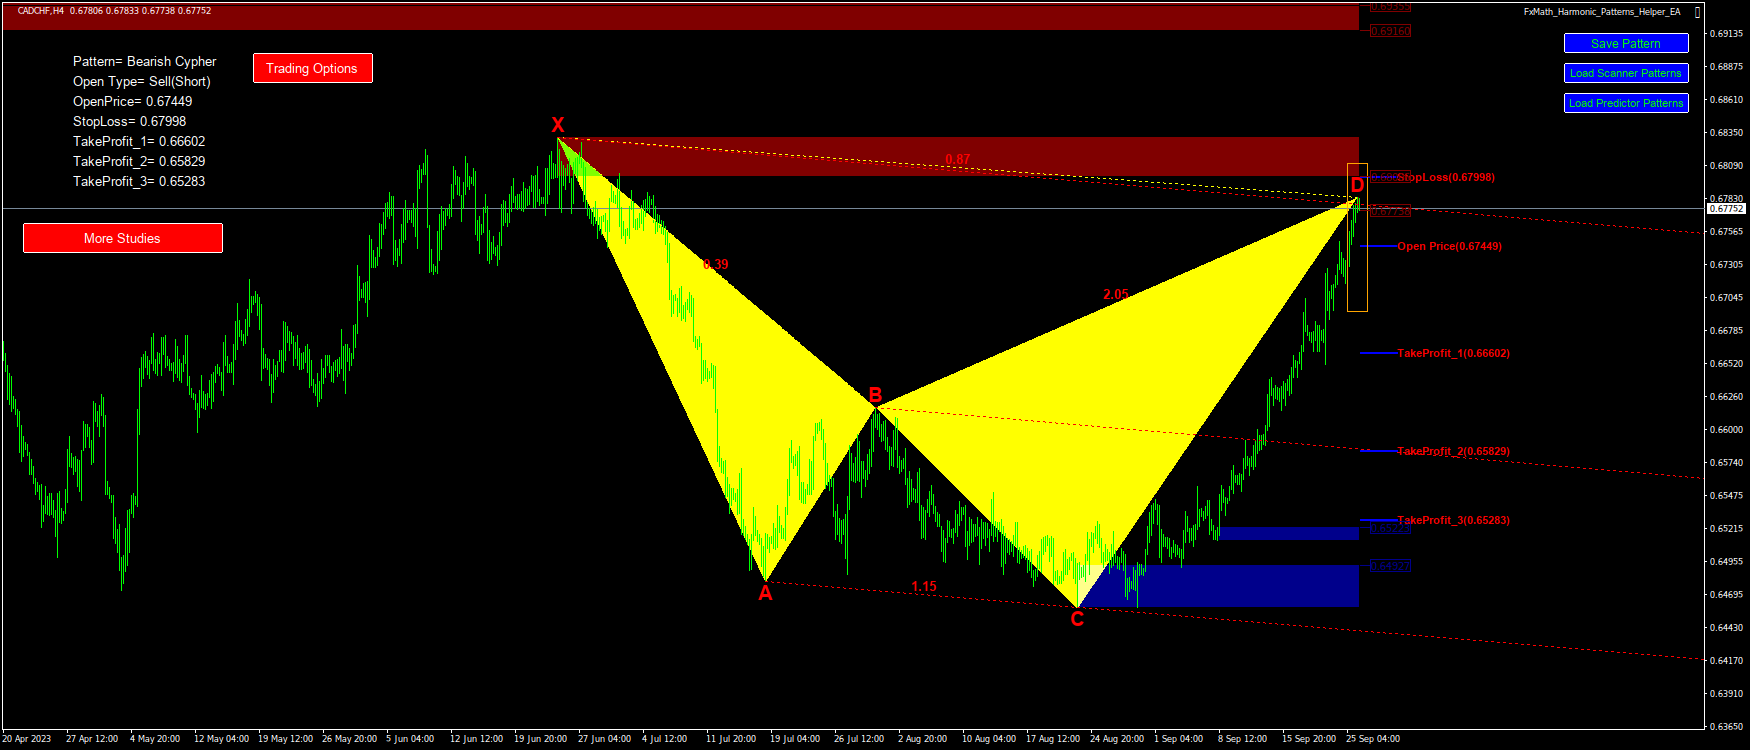 @CADCHF(H4)-Pattern: Cypher : SellStop@: 0.67449, StopLoss: 0.67998, TakeProfit_1: 0.66602, TakeProfit_2: 0.65829, TakeProfit_3: 0.65283-2023.09.26 06:50